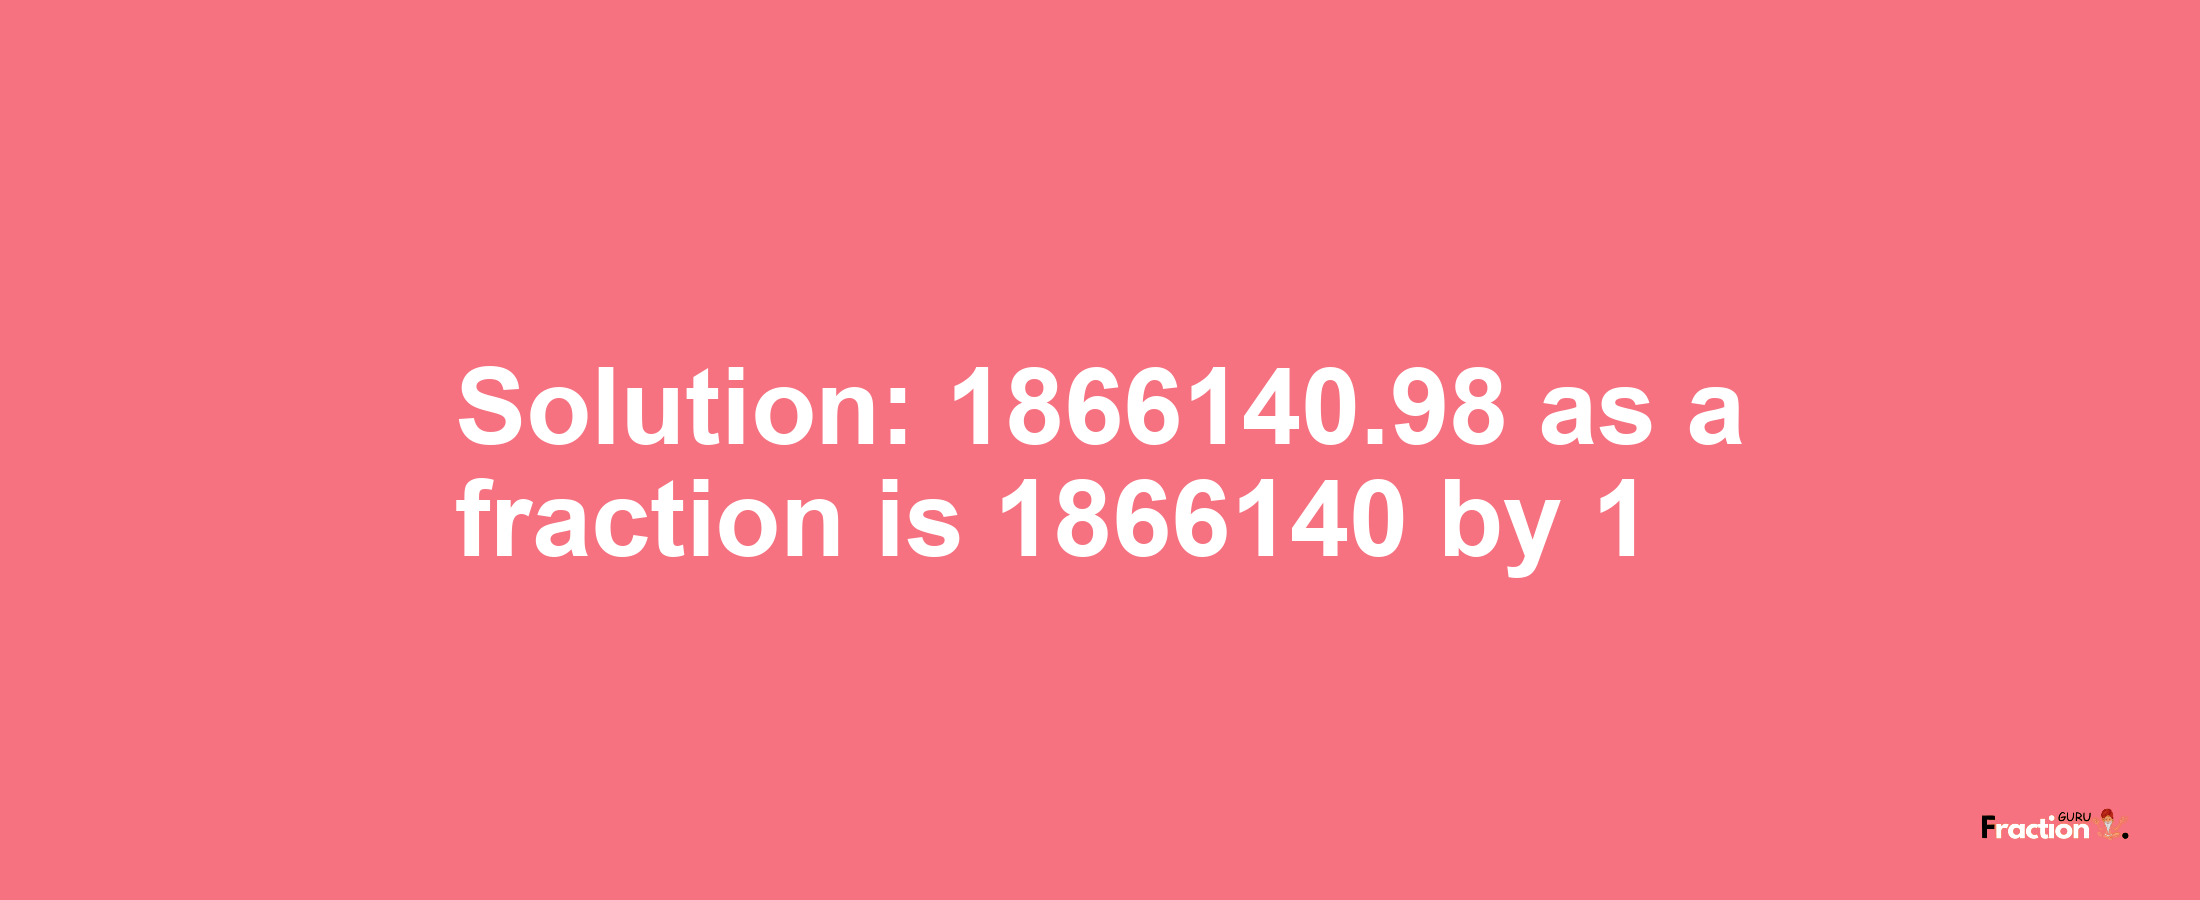 Solution:1866140.98 as a fraction is 1866140/1